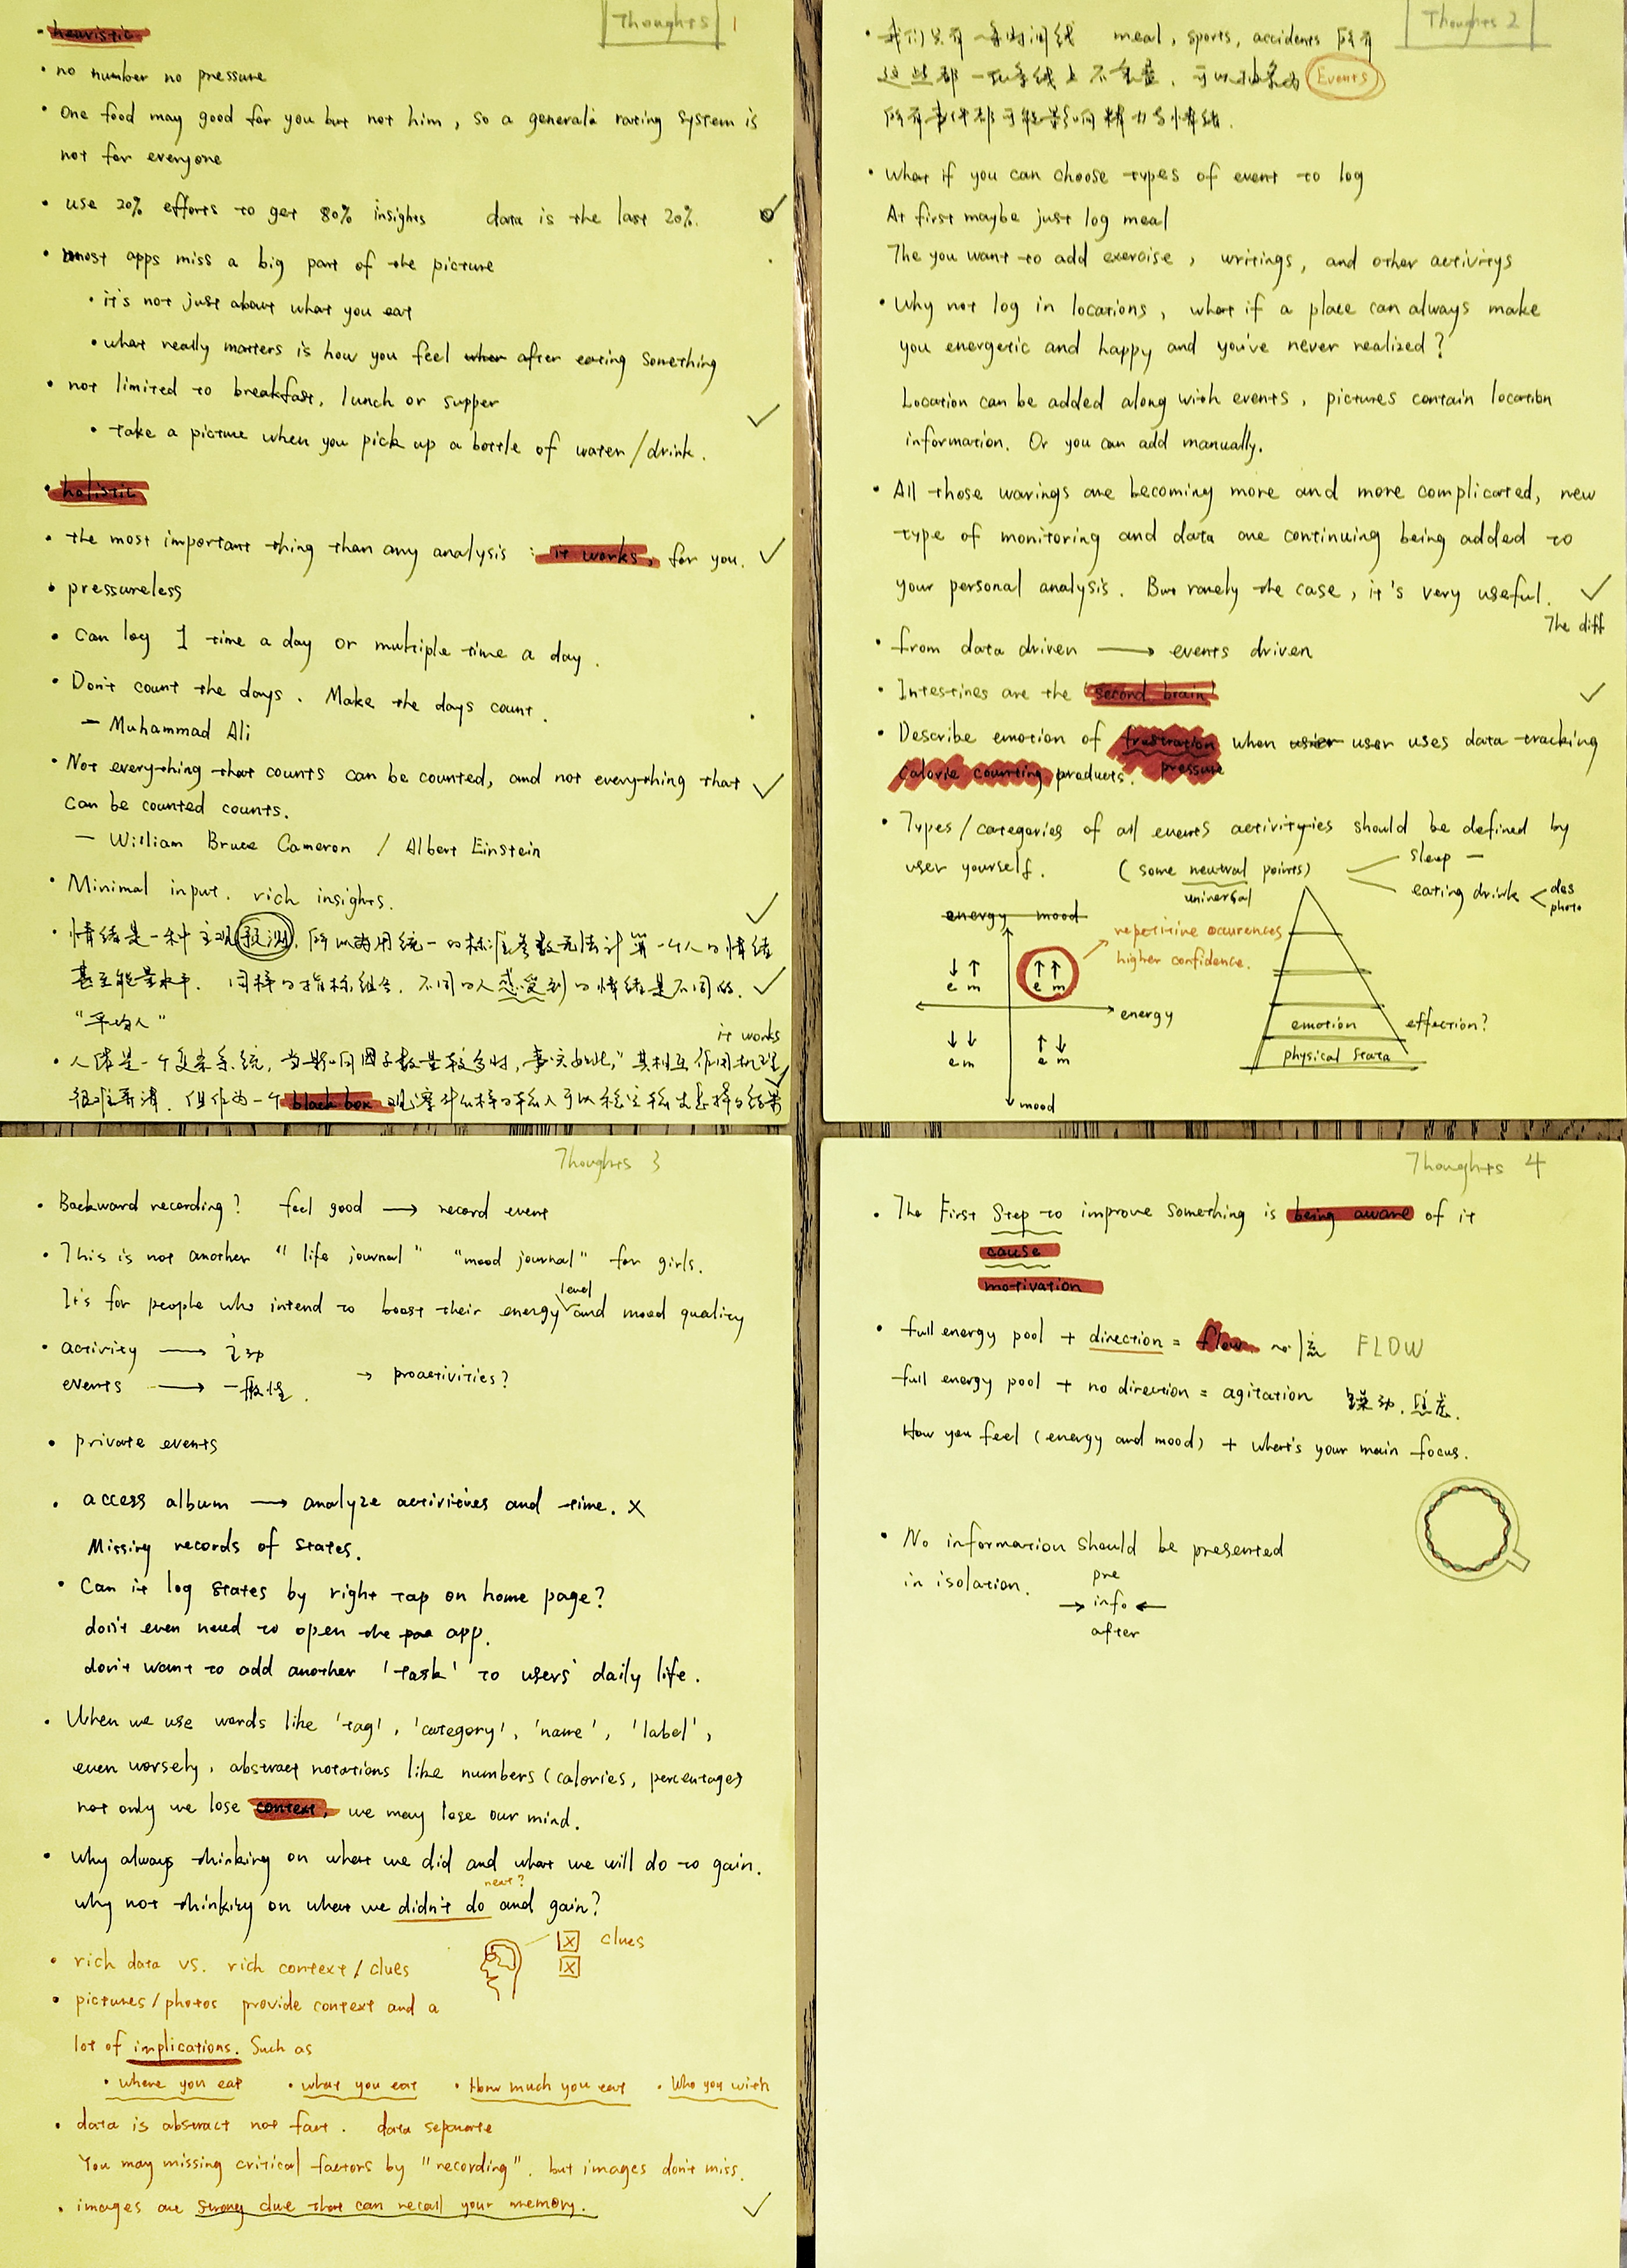 hand-written drafts of thoughts